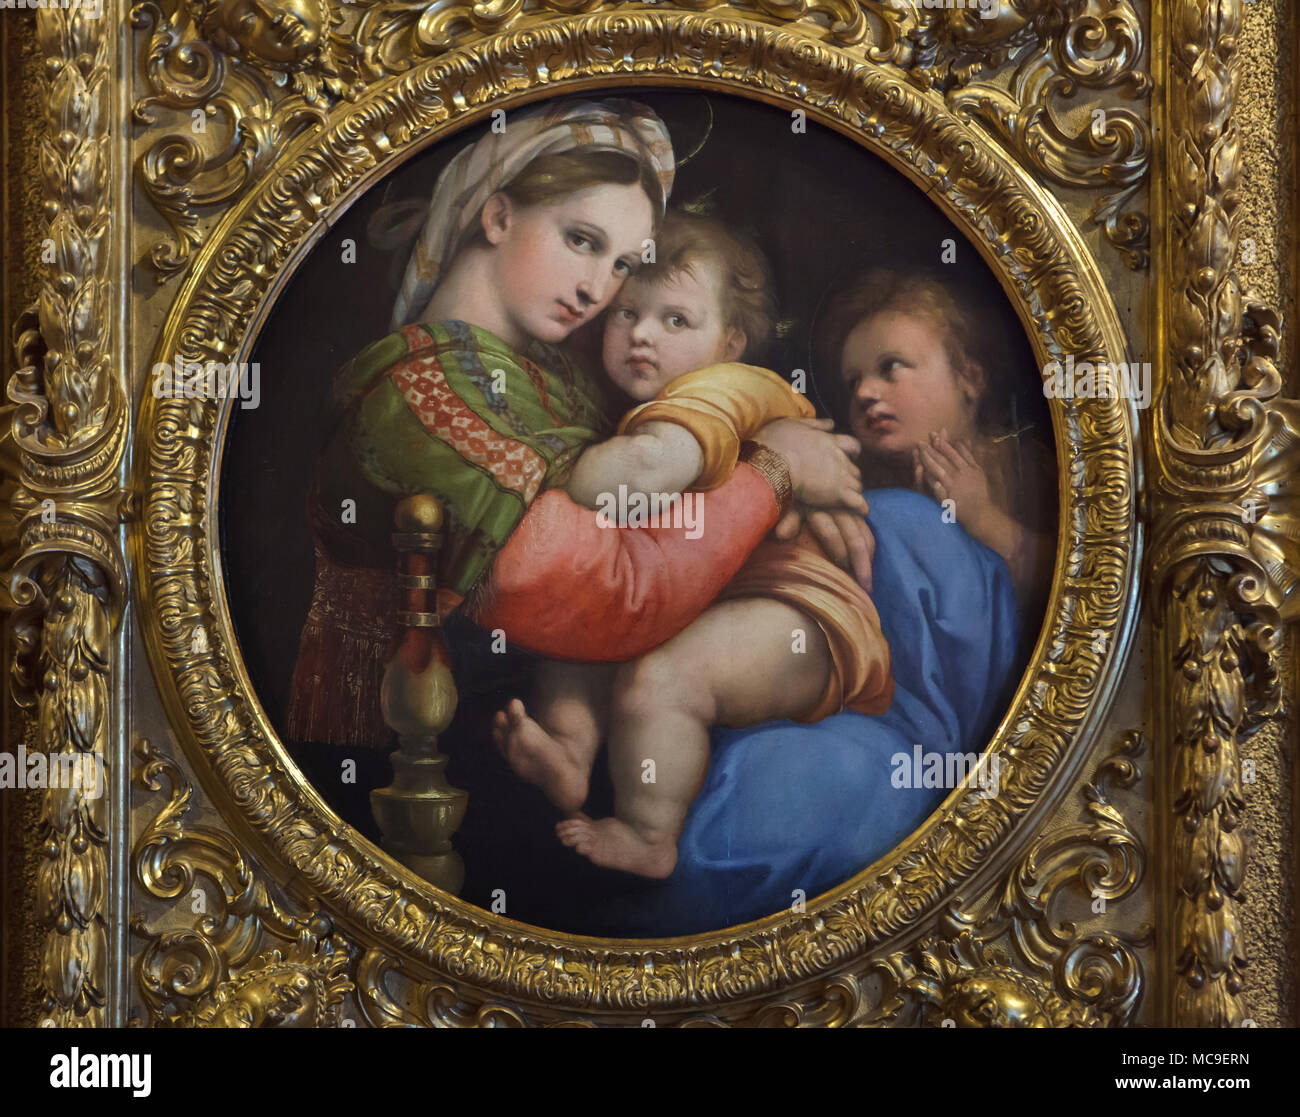 Painting 'Madonna della seggiola' (1513-1514) by Italian Renaissance painter Raphael on display in the Palatine Gallery (Galleria Palatina) in the Palazzo Pitti in Florence, Tuscany, Italy. Stock Photo